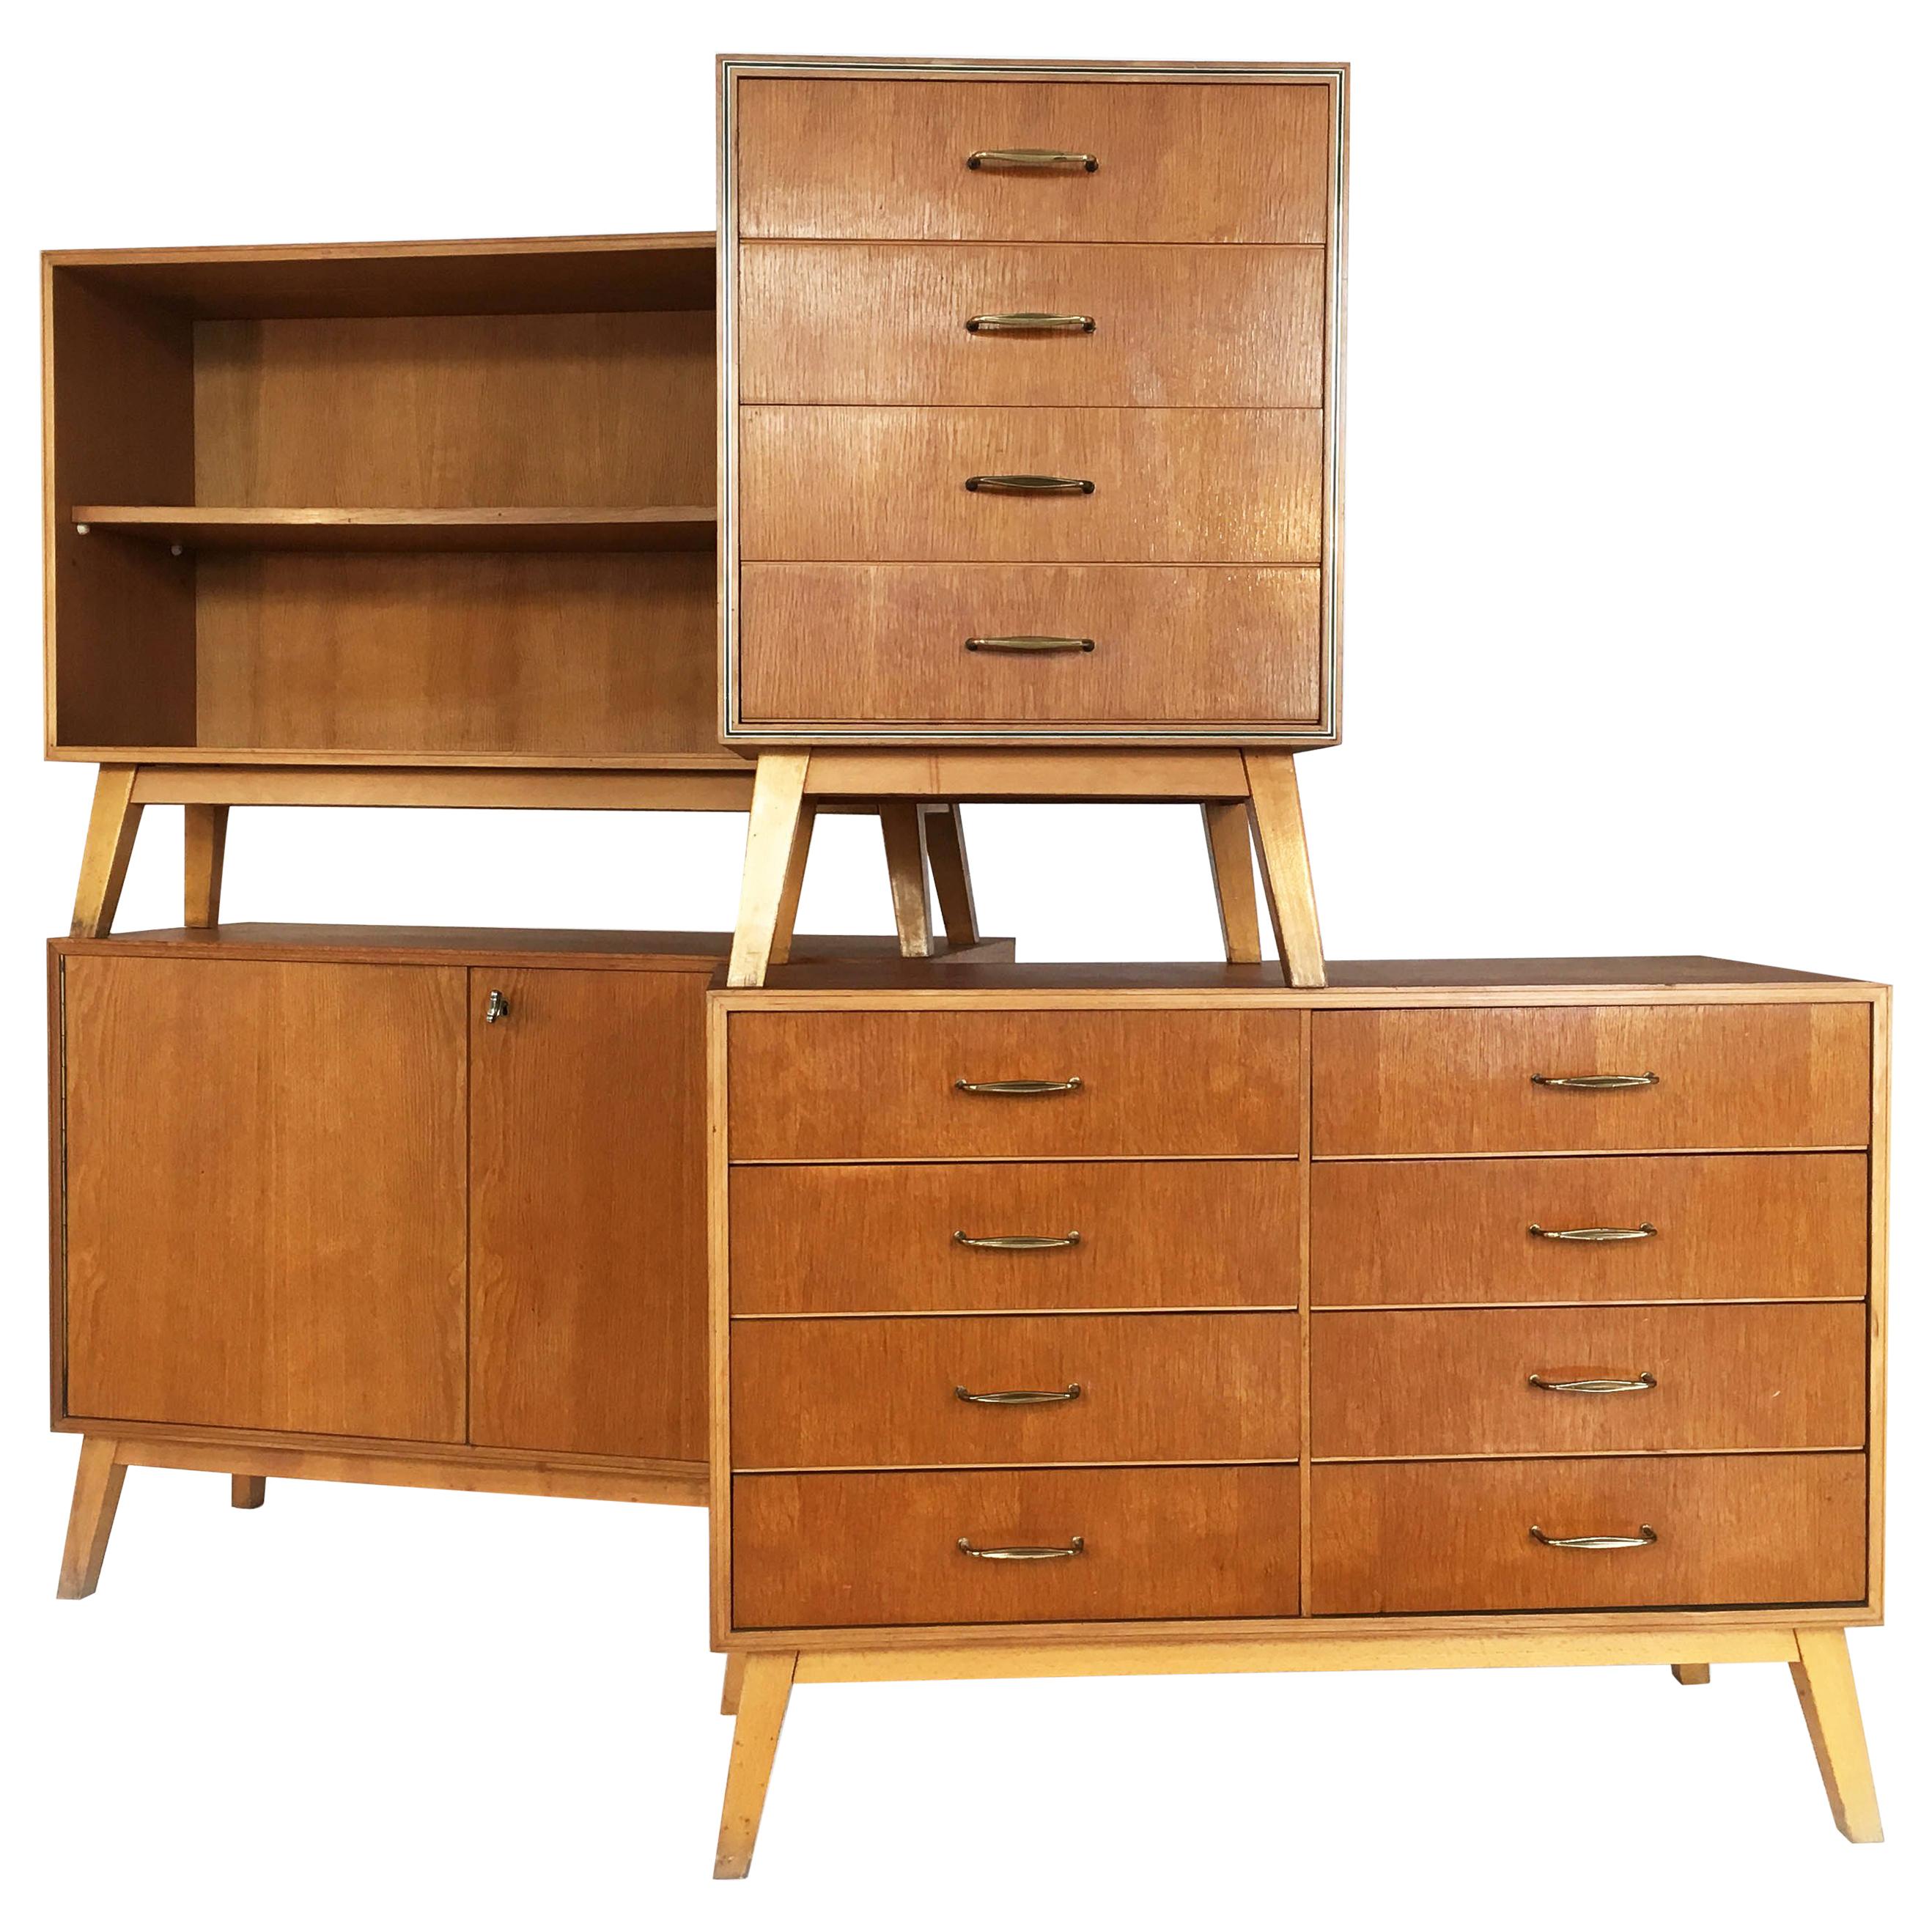 SW Möbel Sideboard, Chest of Drawers, Bookcase Collection, Vienna, 1950s For Sale